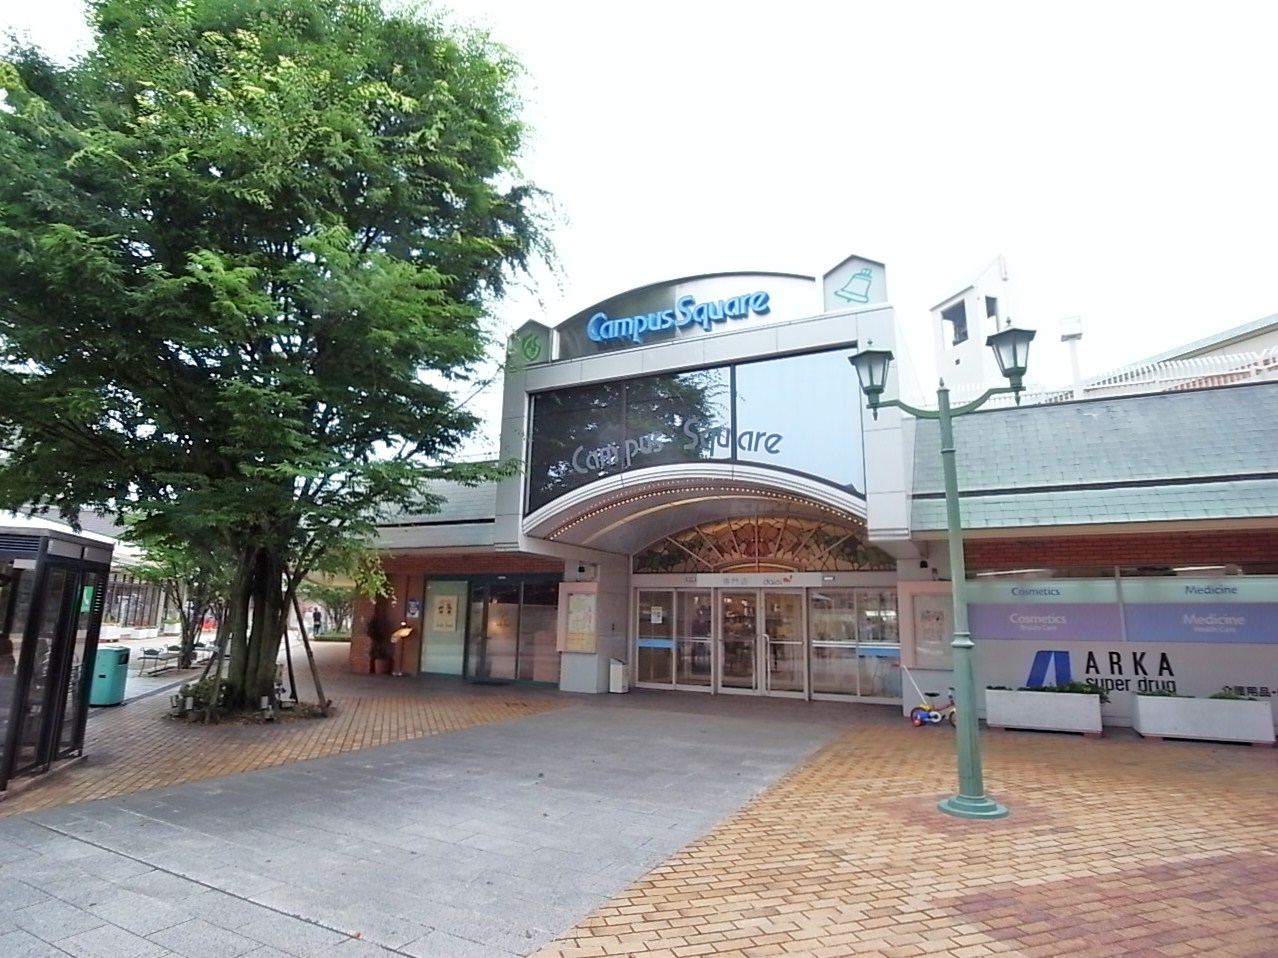 Shopping centre. 400m to campus Square (shopping center)